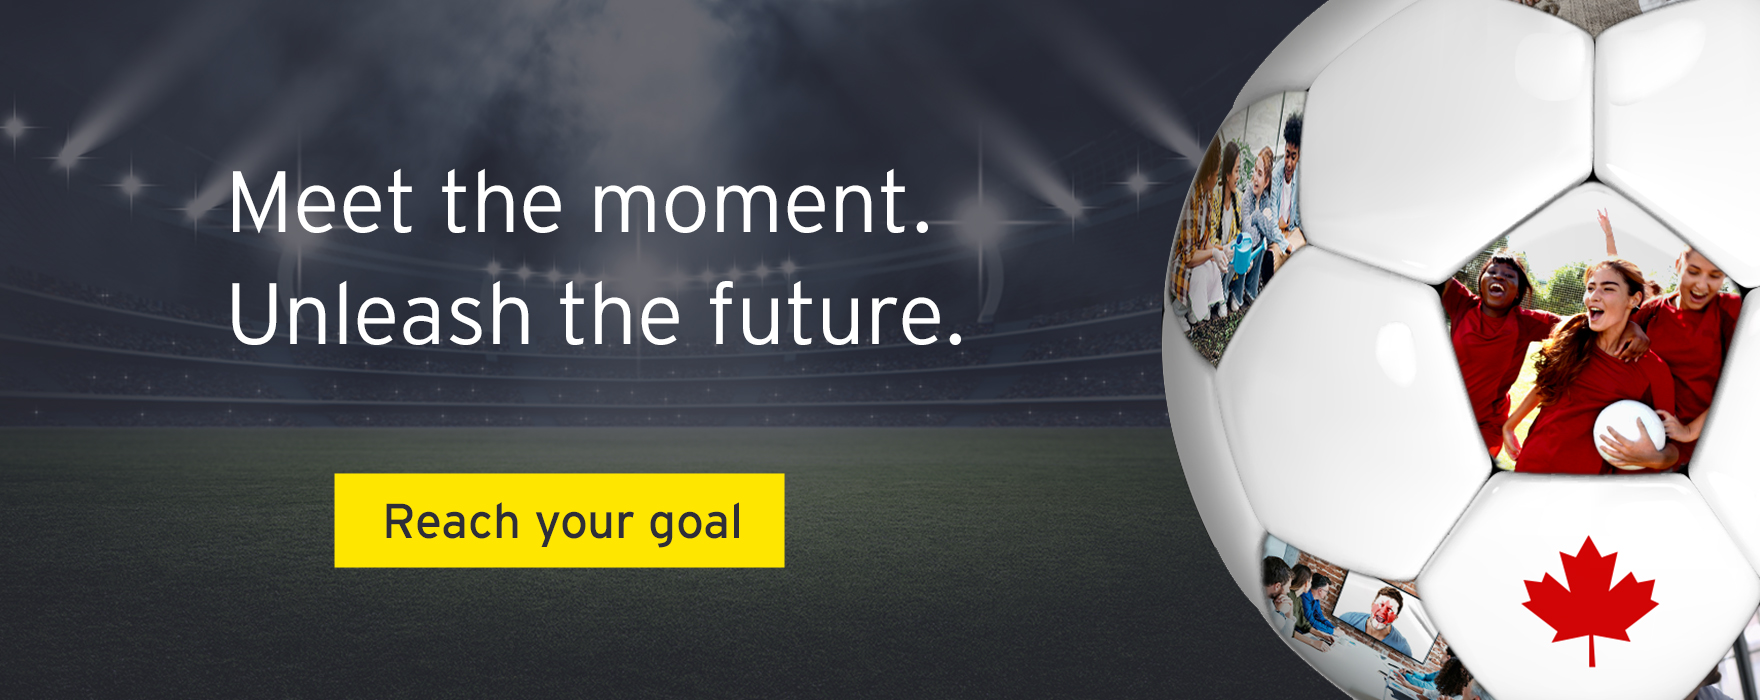 Reach your goal - Meet the moment.  Unleash the future